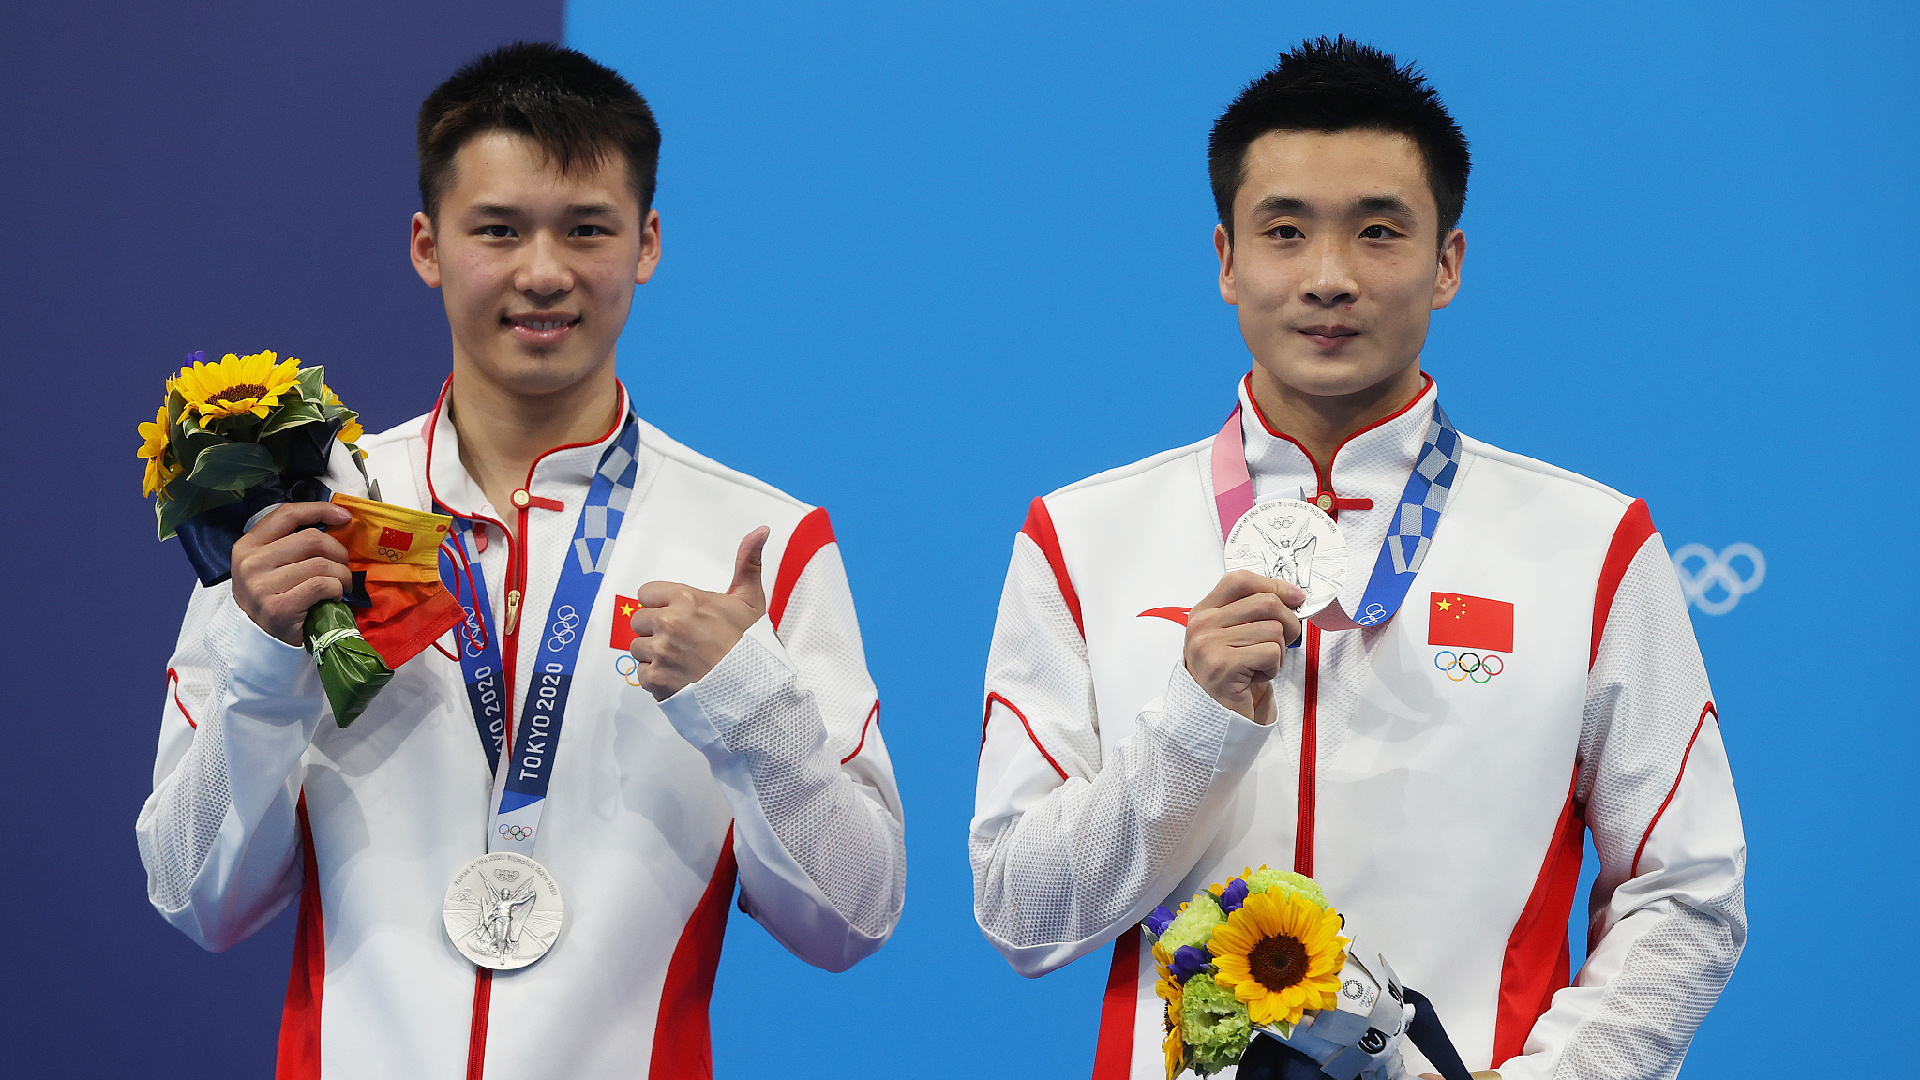 Chinese duo, Synchronized platform dive, Silver medal, CGTN coverage, 1920x1080 Full HD Desktop